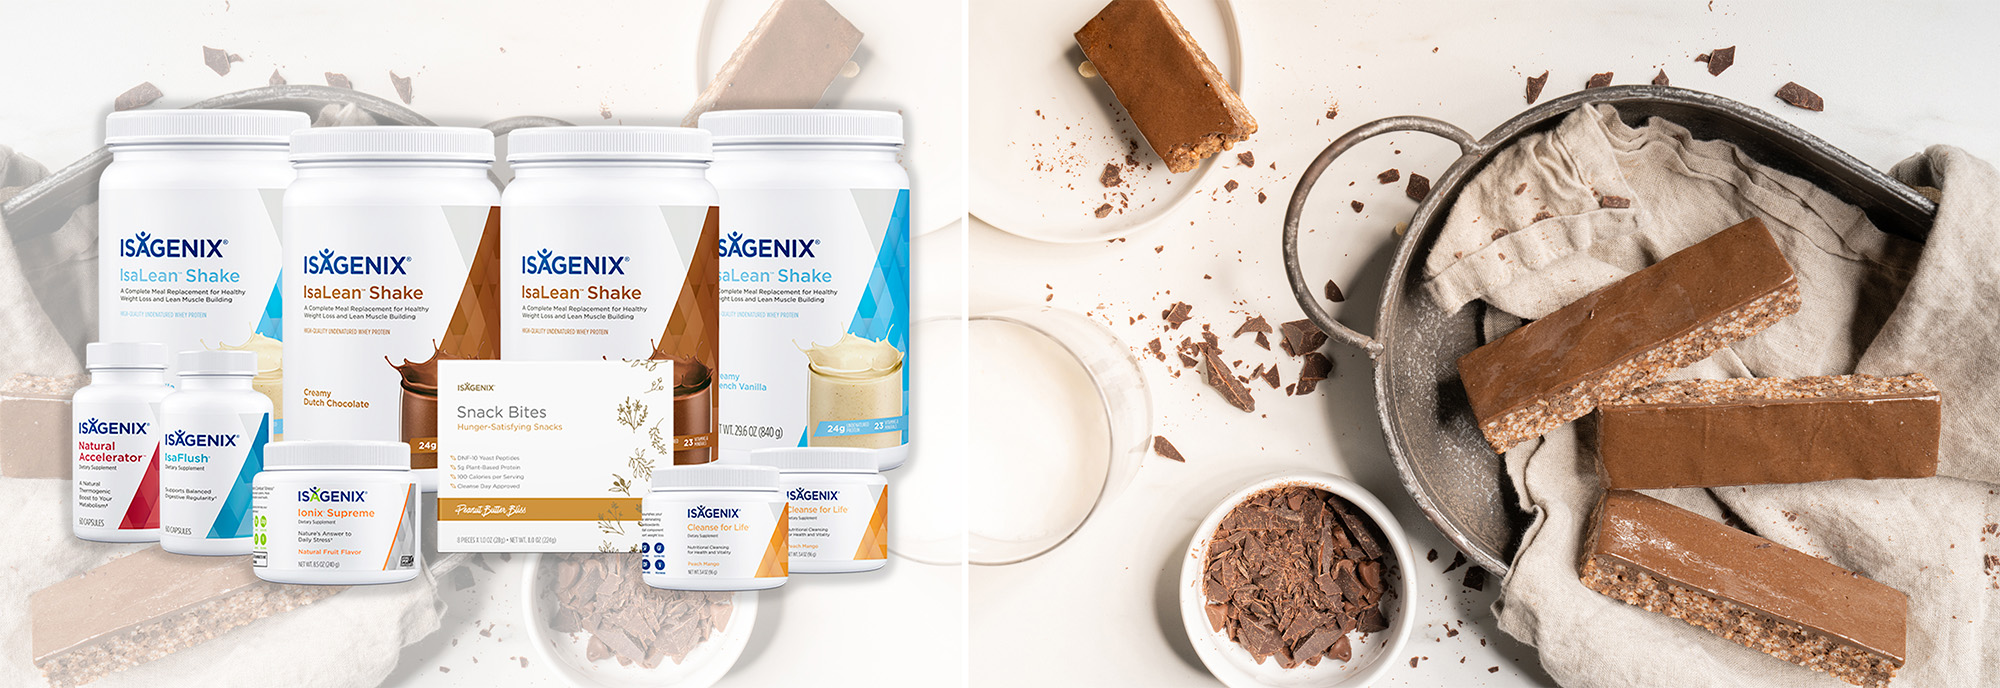 isagenix new products